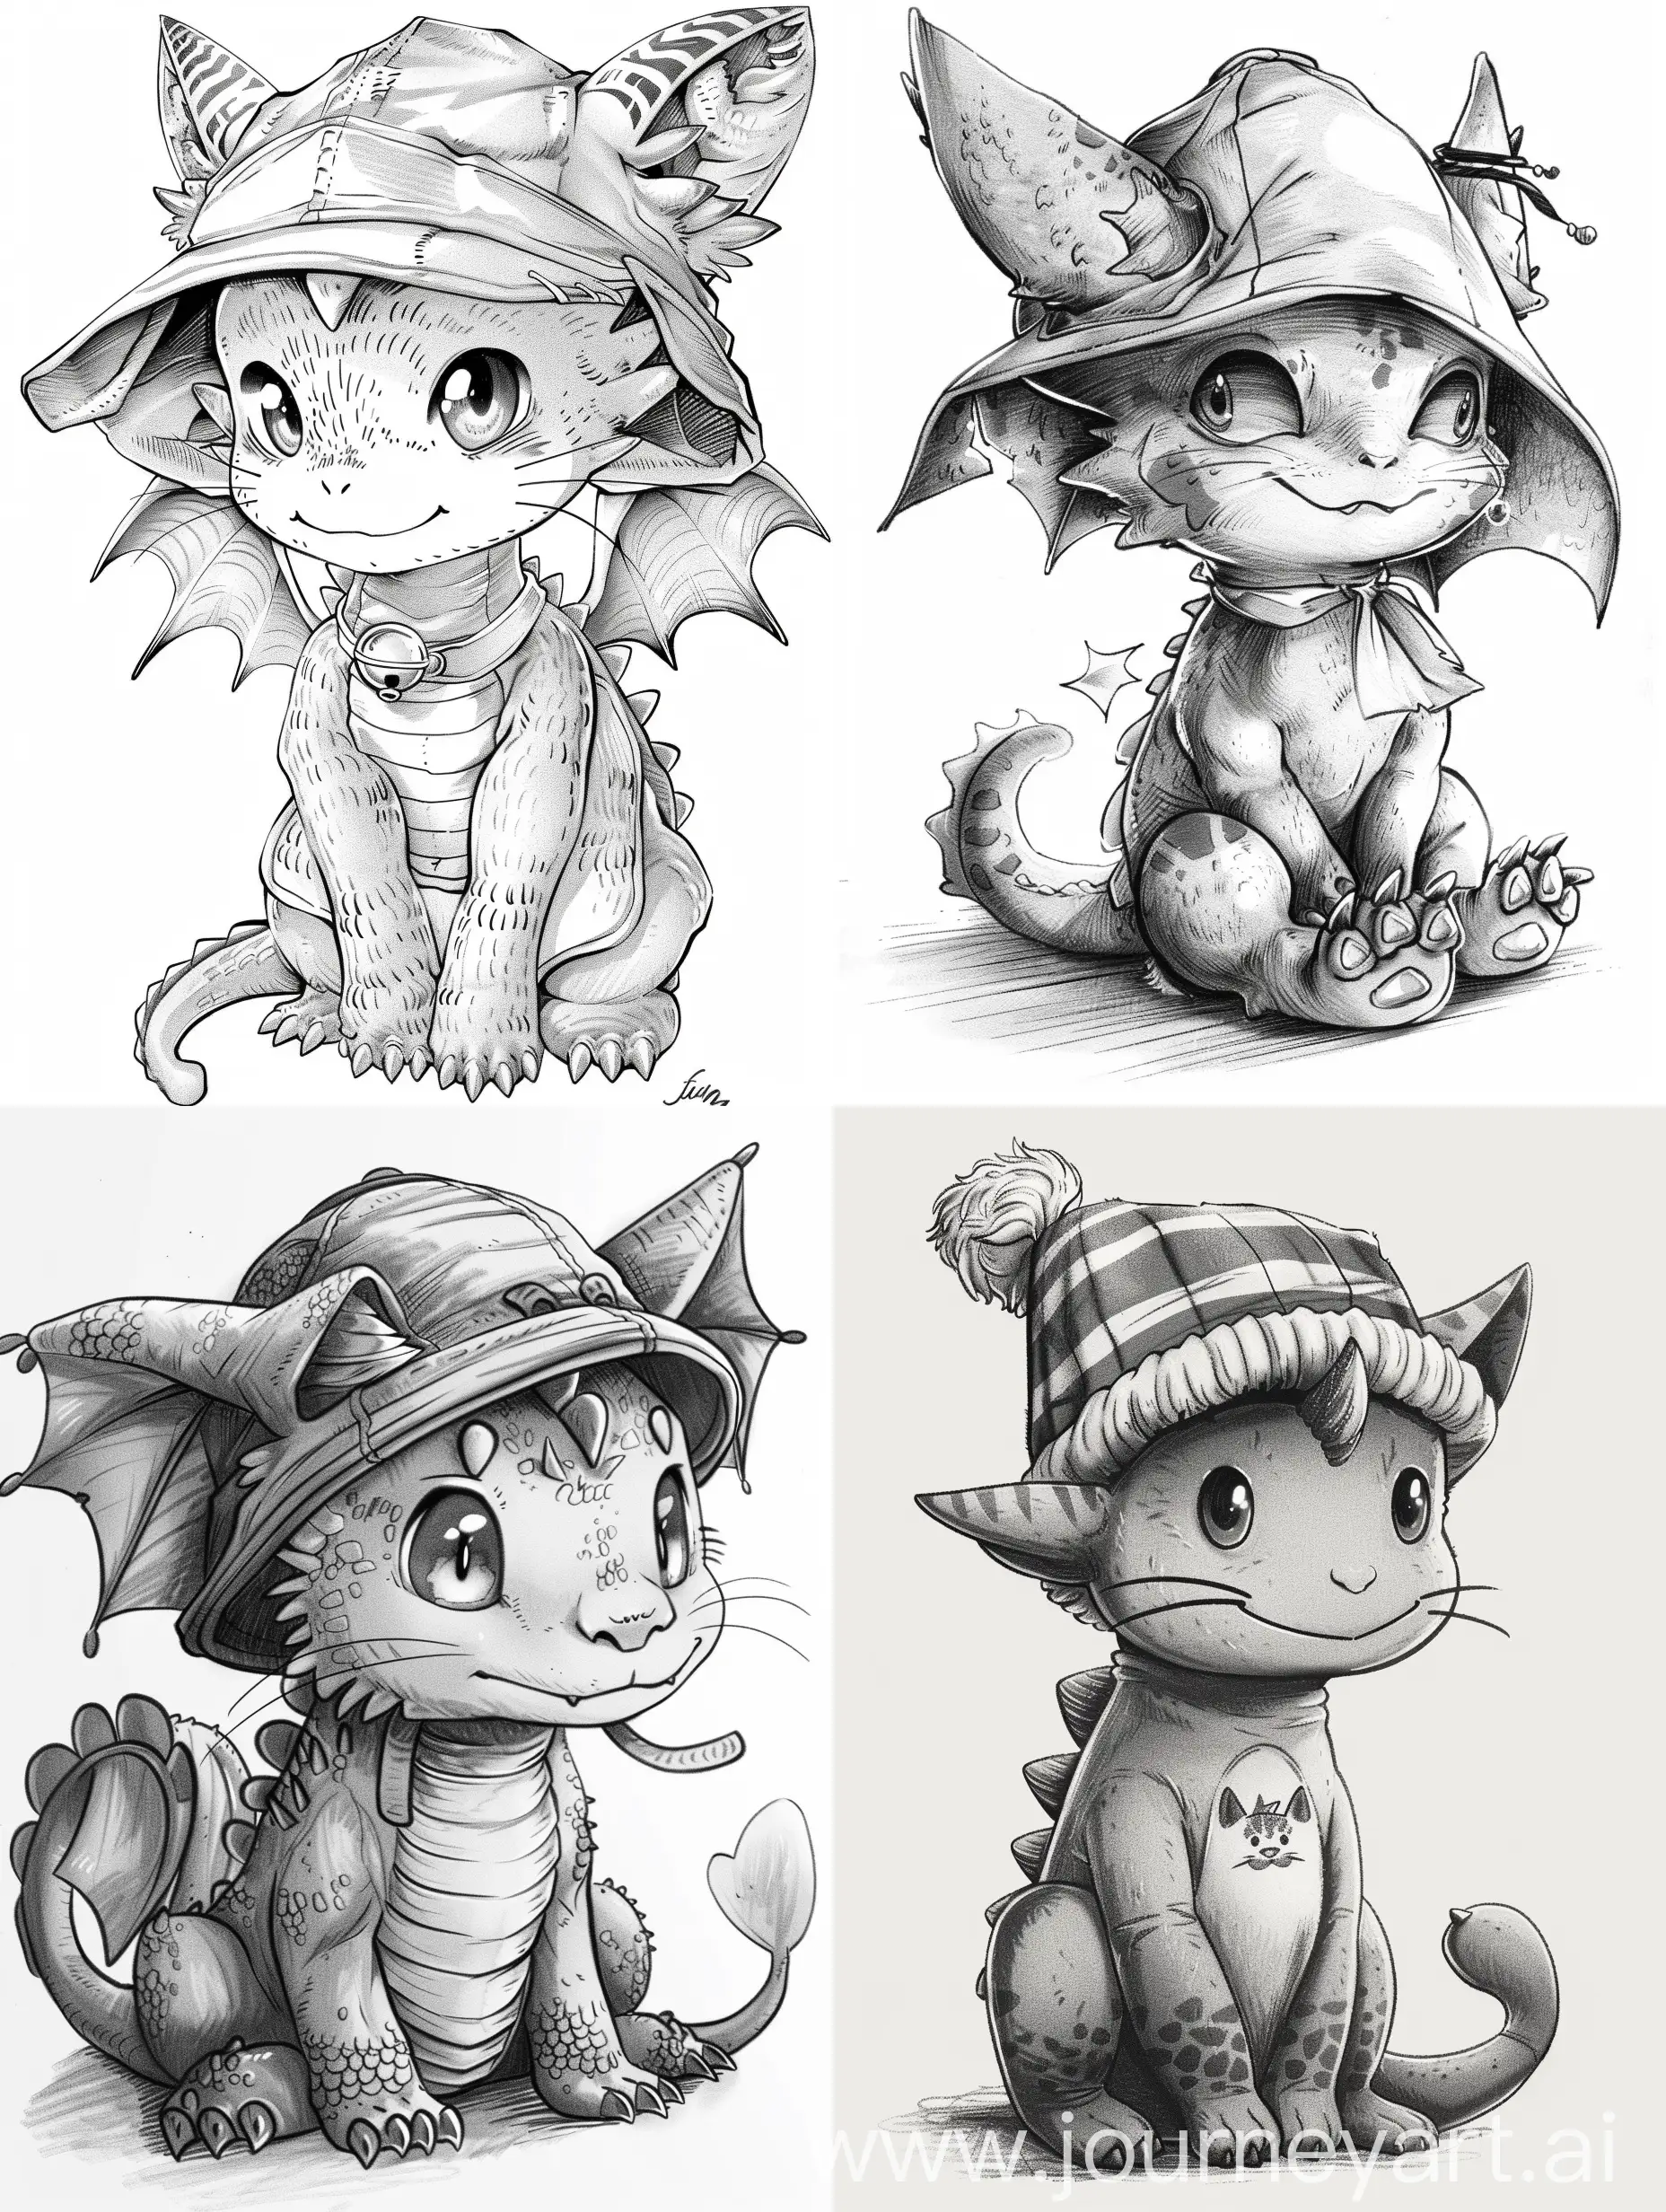 very cute dragon 6 years old waring a hat with cat ears, manga style like junji ito but cute, monochrome colors